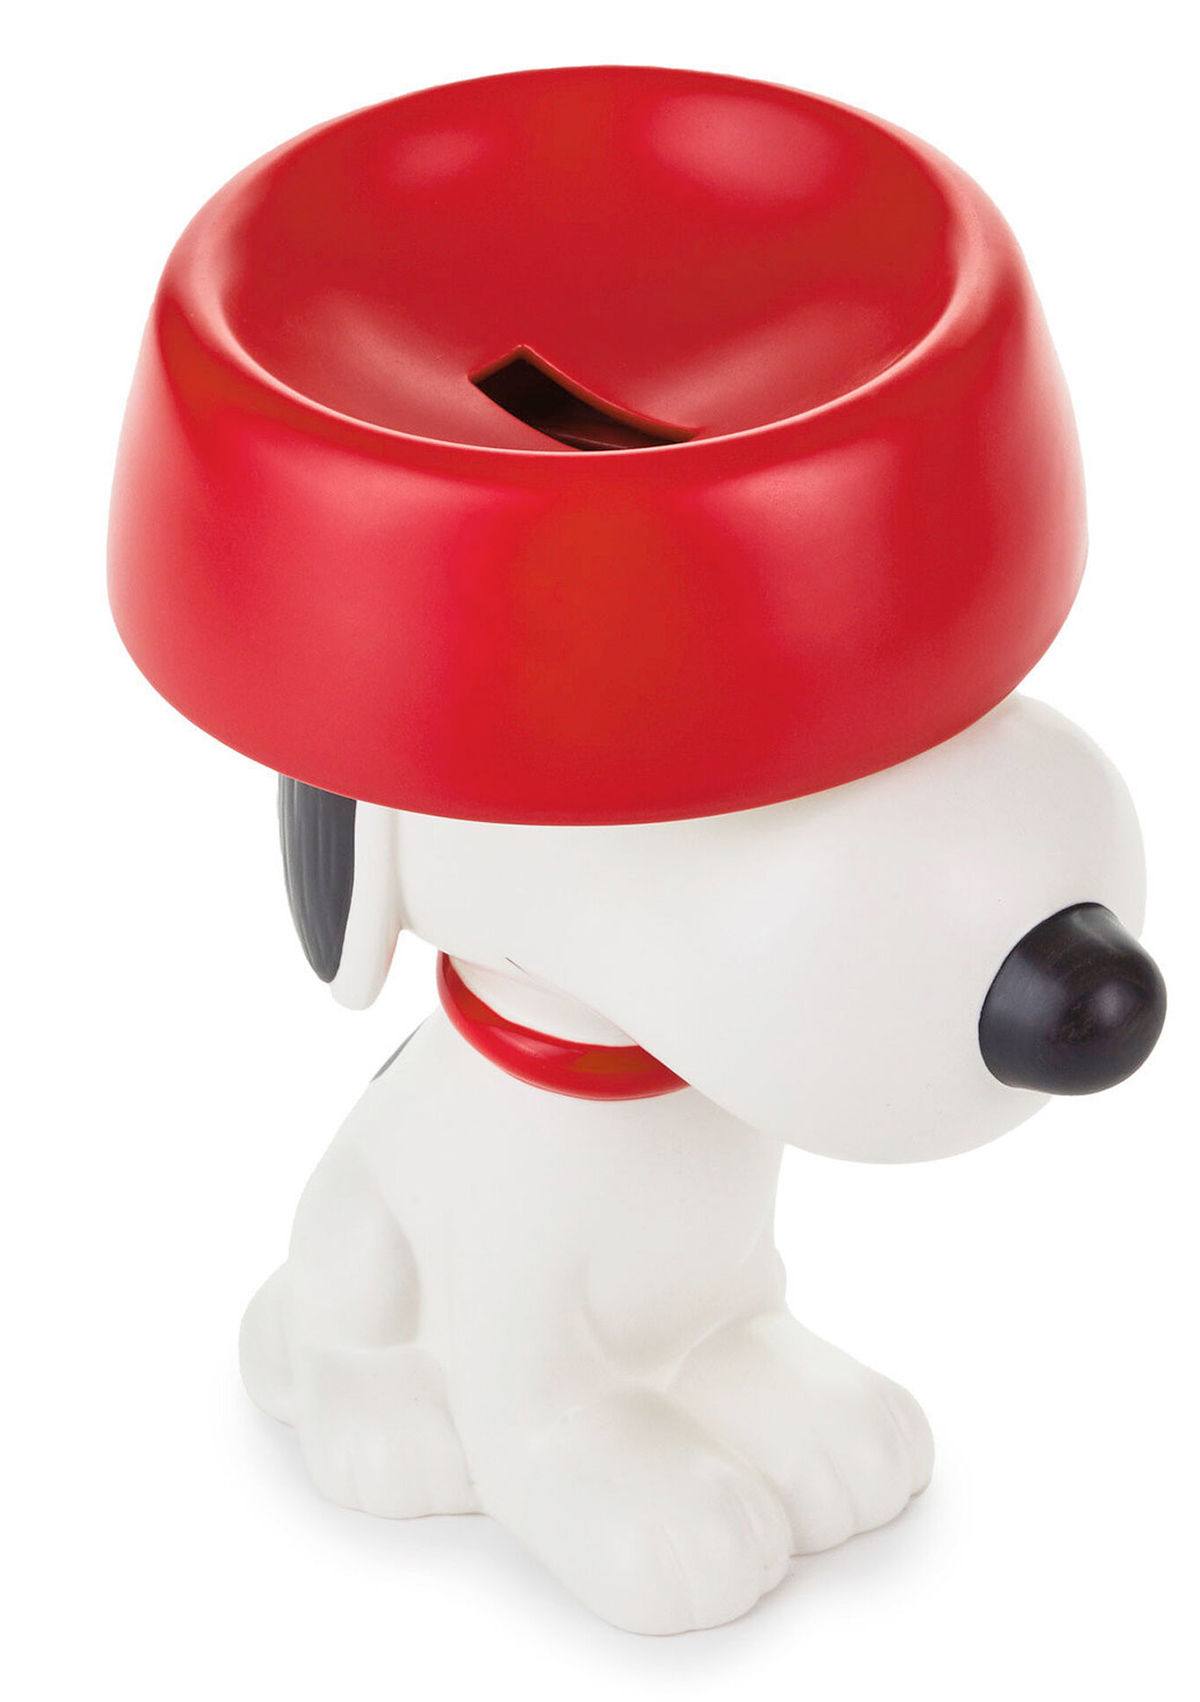 Snoopy Safe with Red Bowl on His Head (Peanuts)